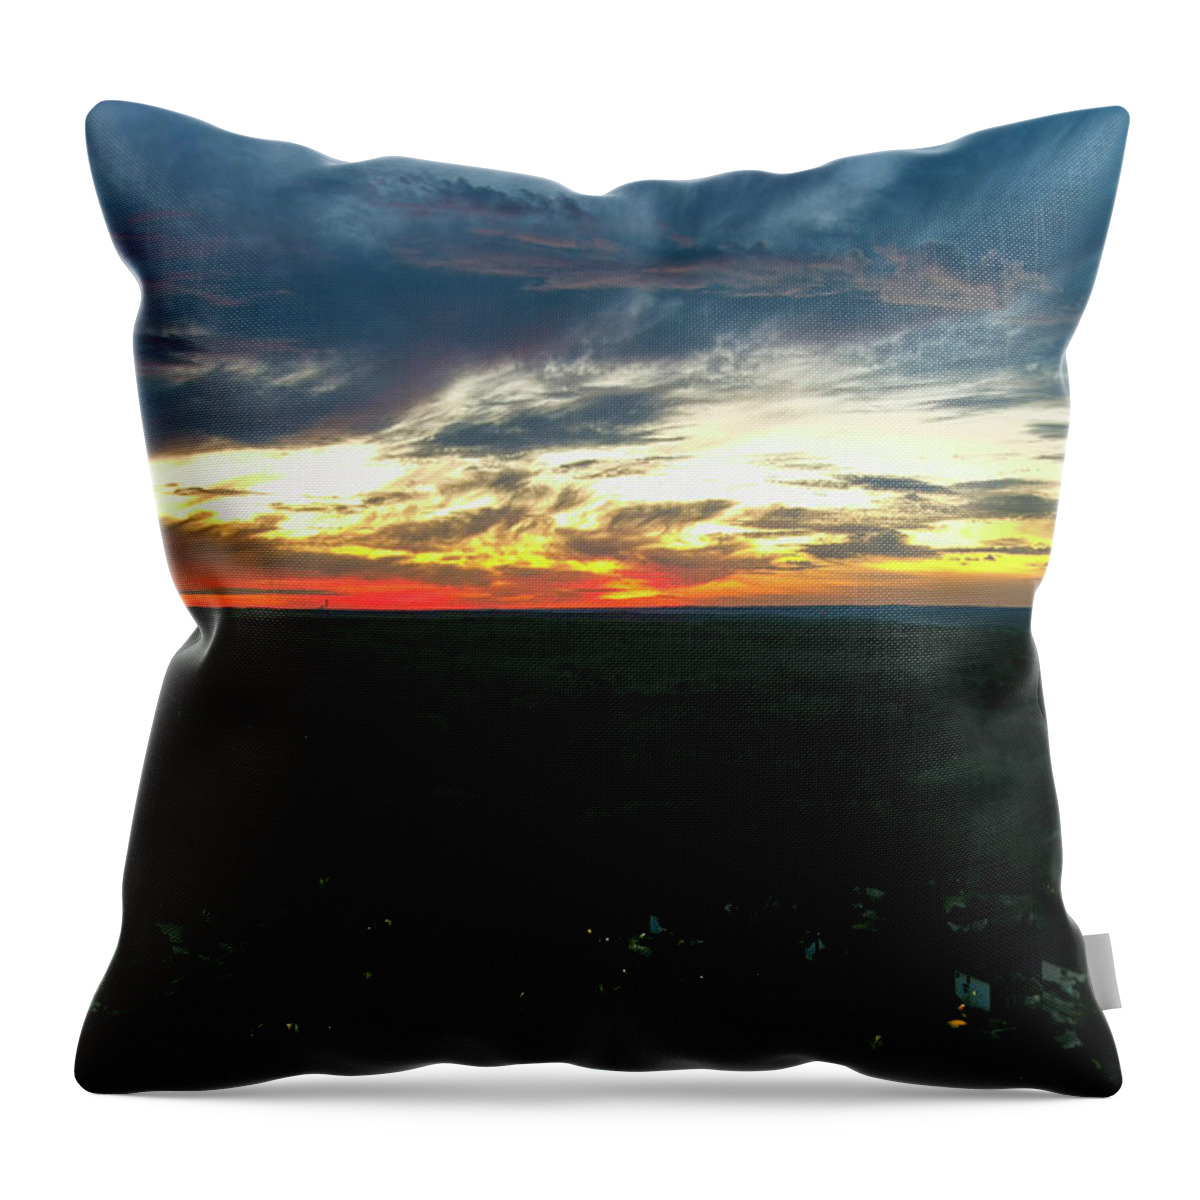 Sunset Throw Pillow featuring the photograph A Glorious Sunset Over Georgia by Marcus Jones